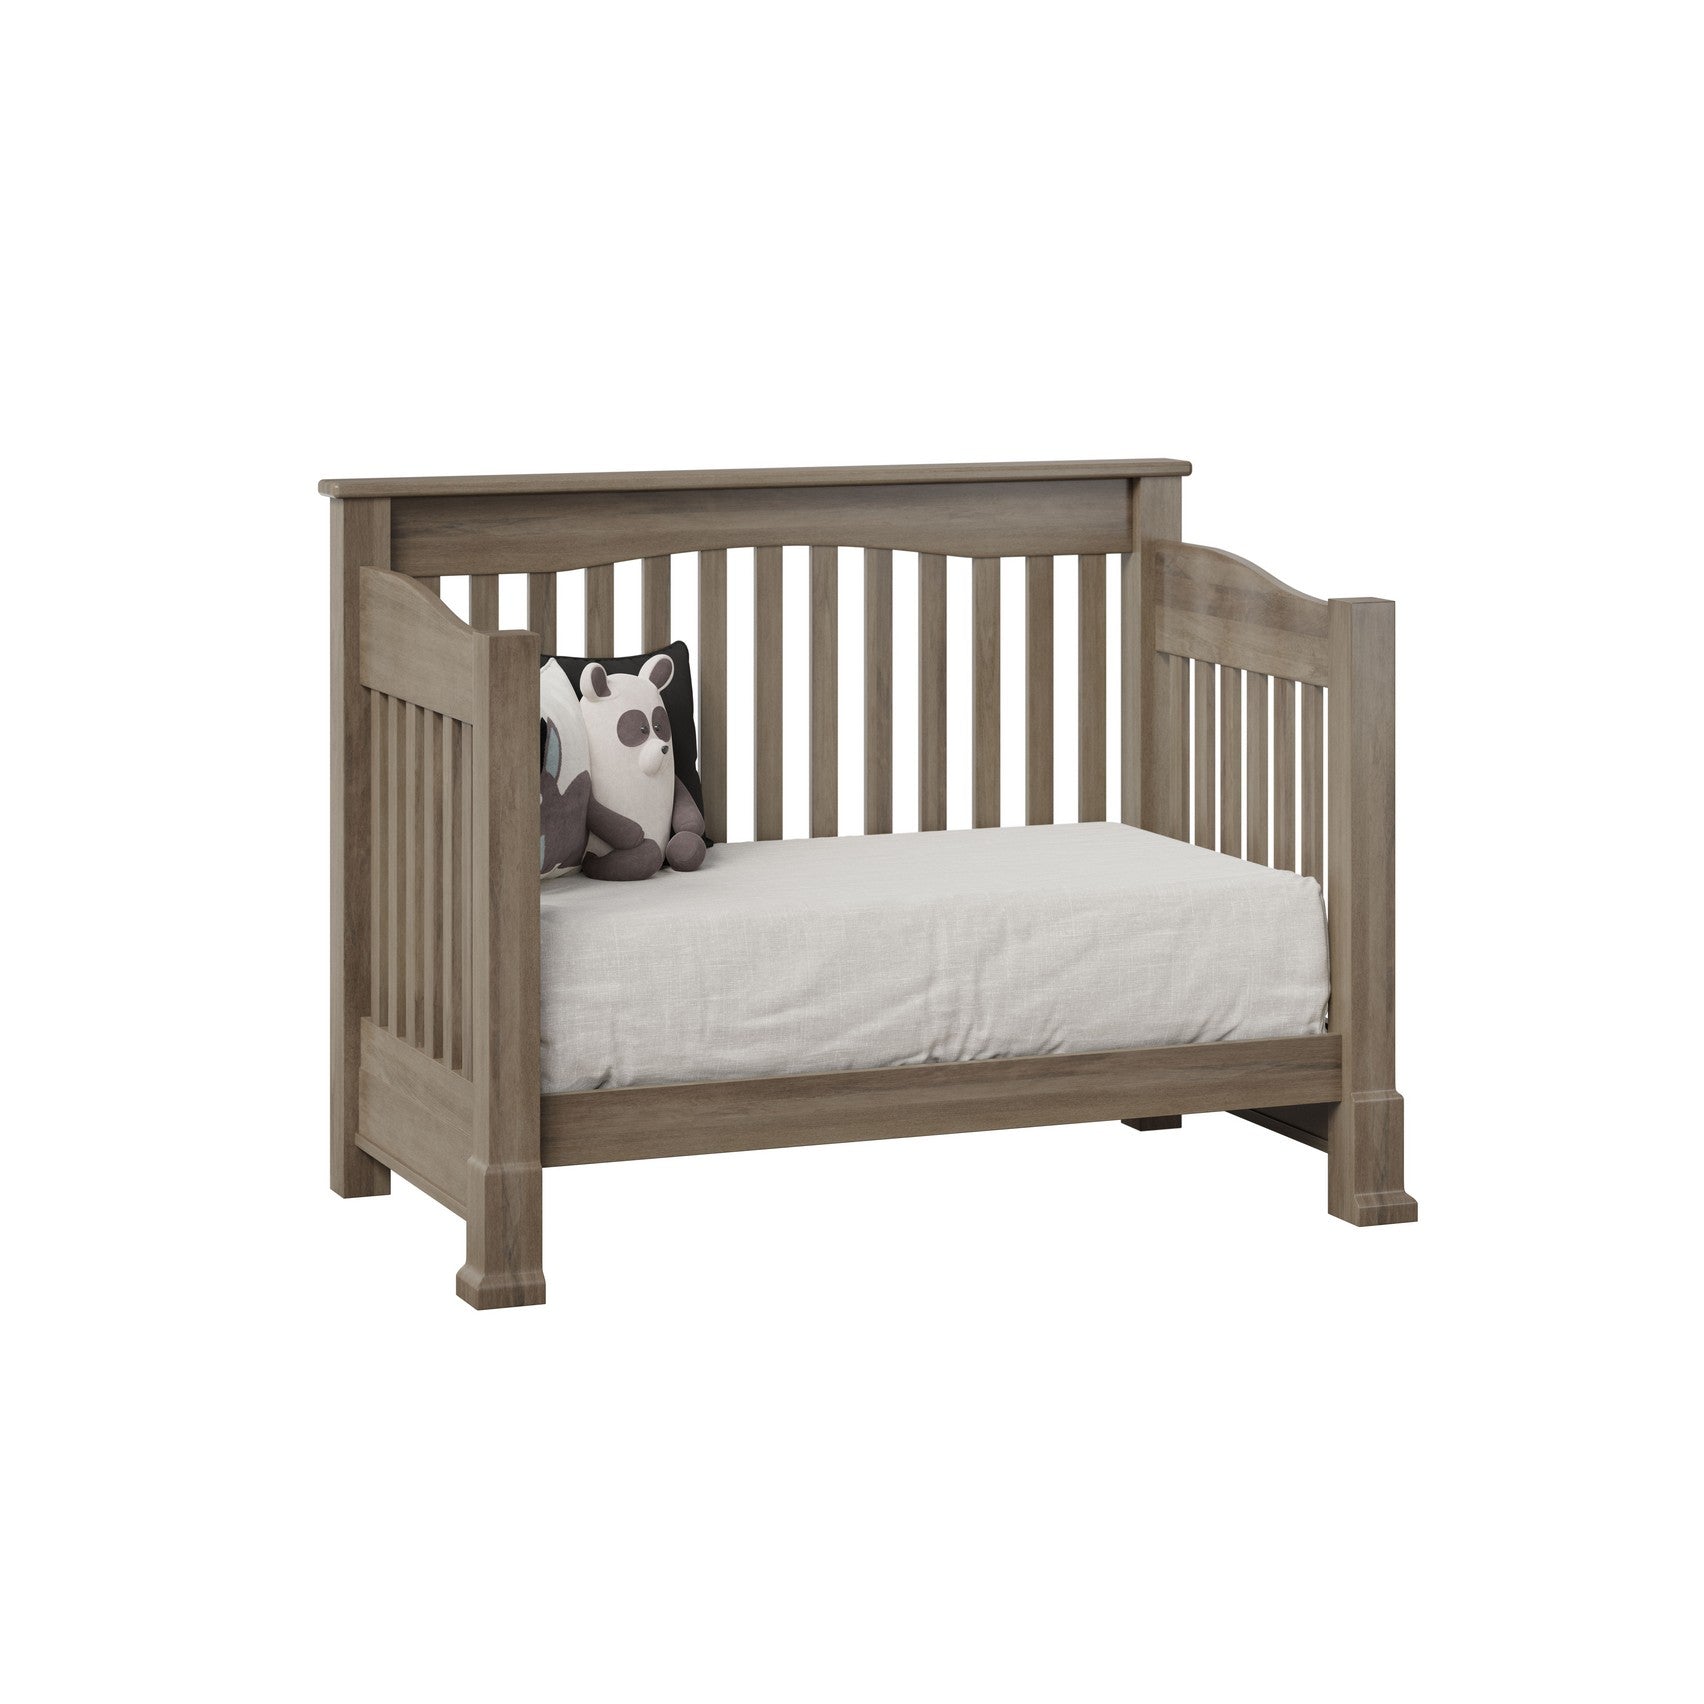 mackenzie toddler bed in sap cherry with mineral stain